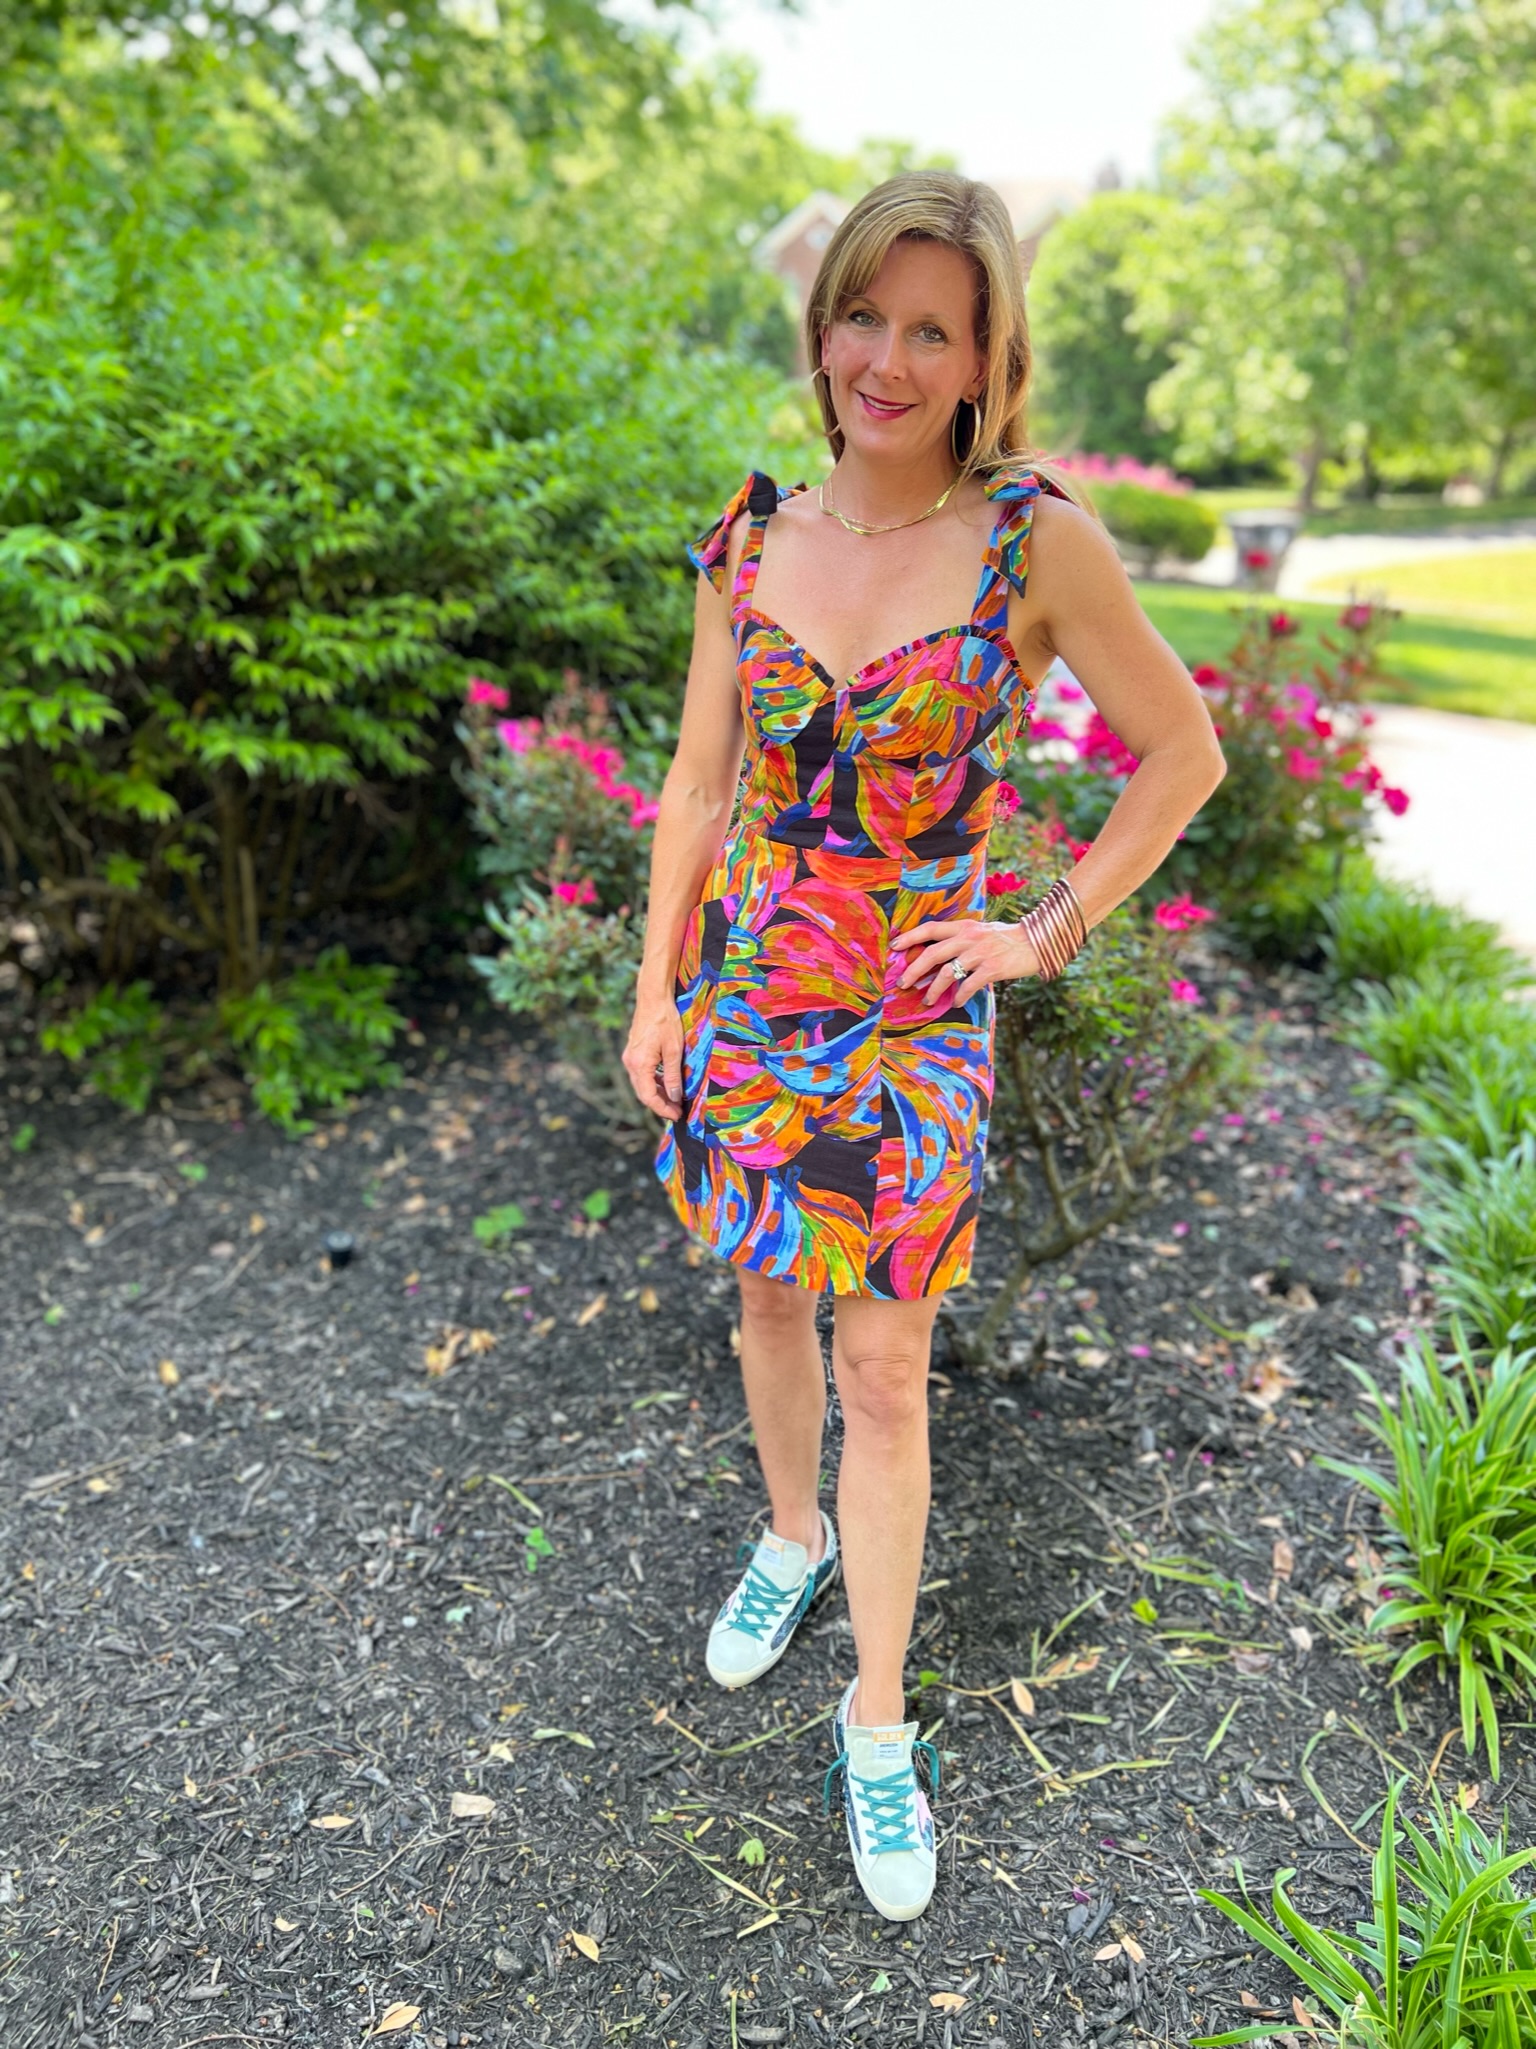 how to style sneakers with a sundress how to wear a dress and sneakers how to style a sundress